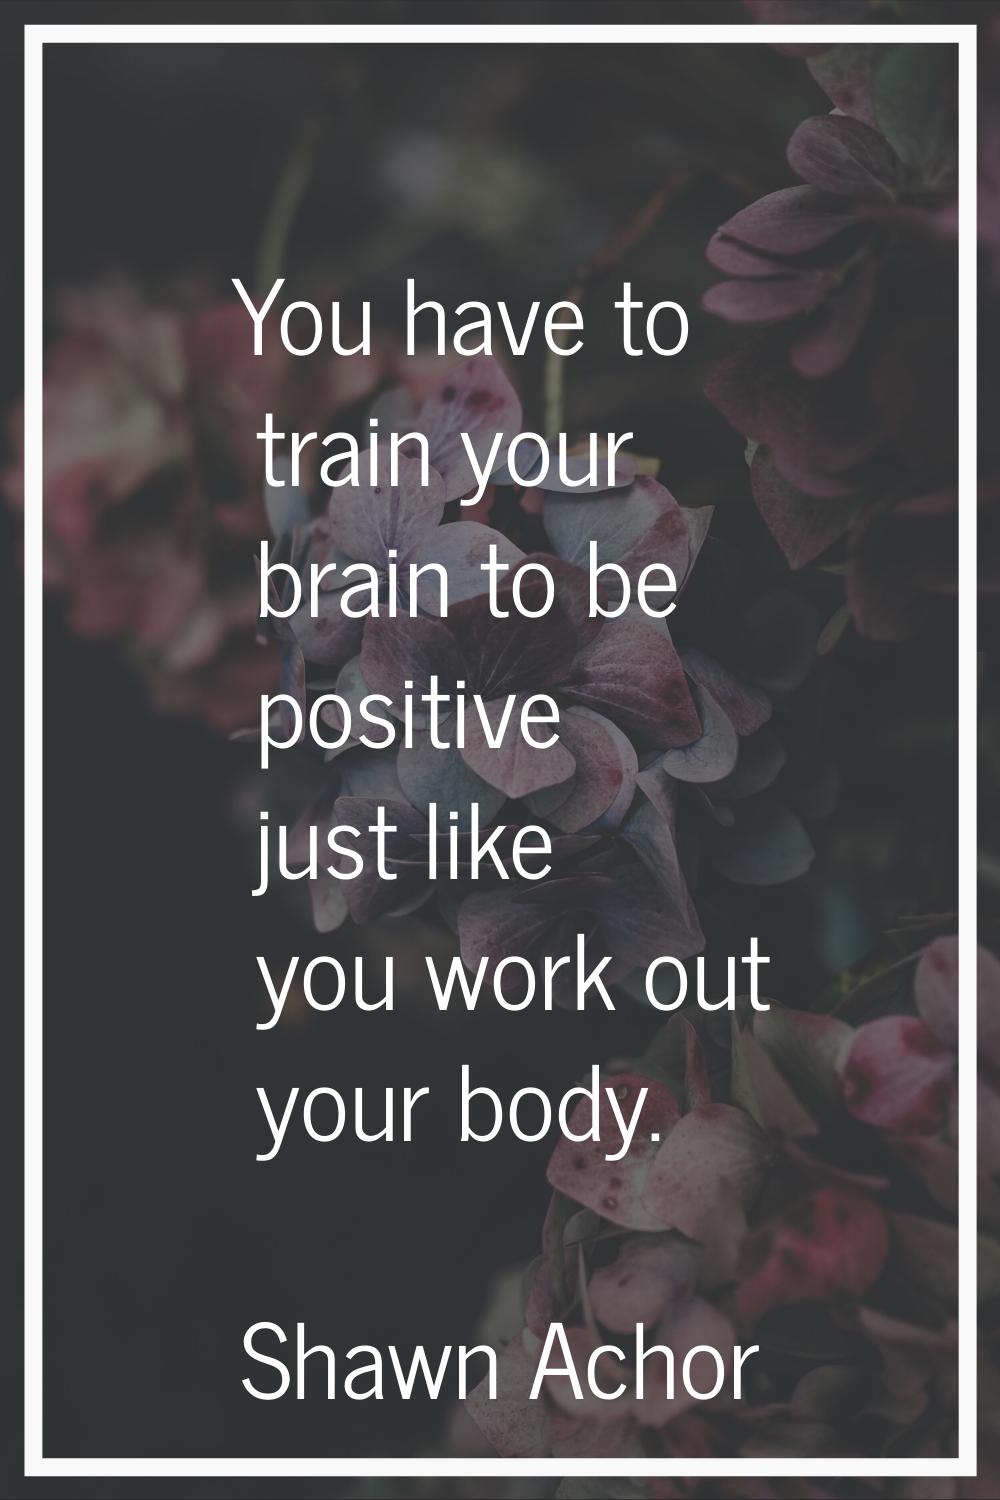 You have to train your brain to be positive just like you work out your body.